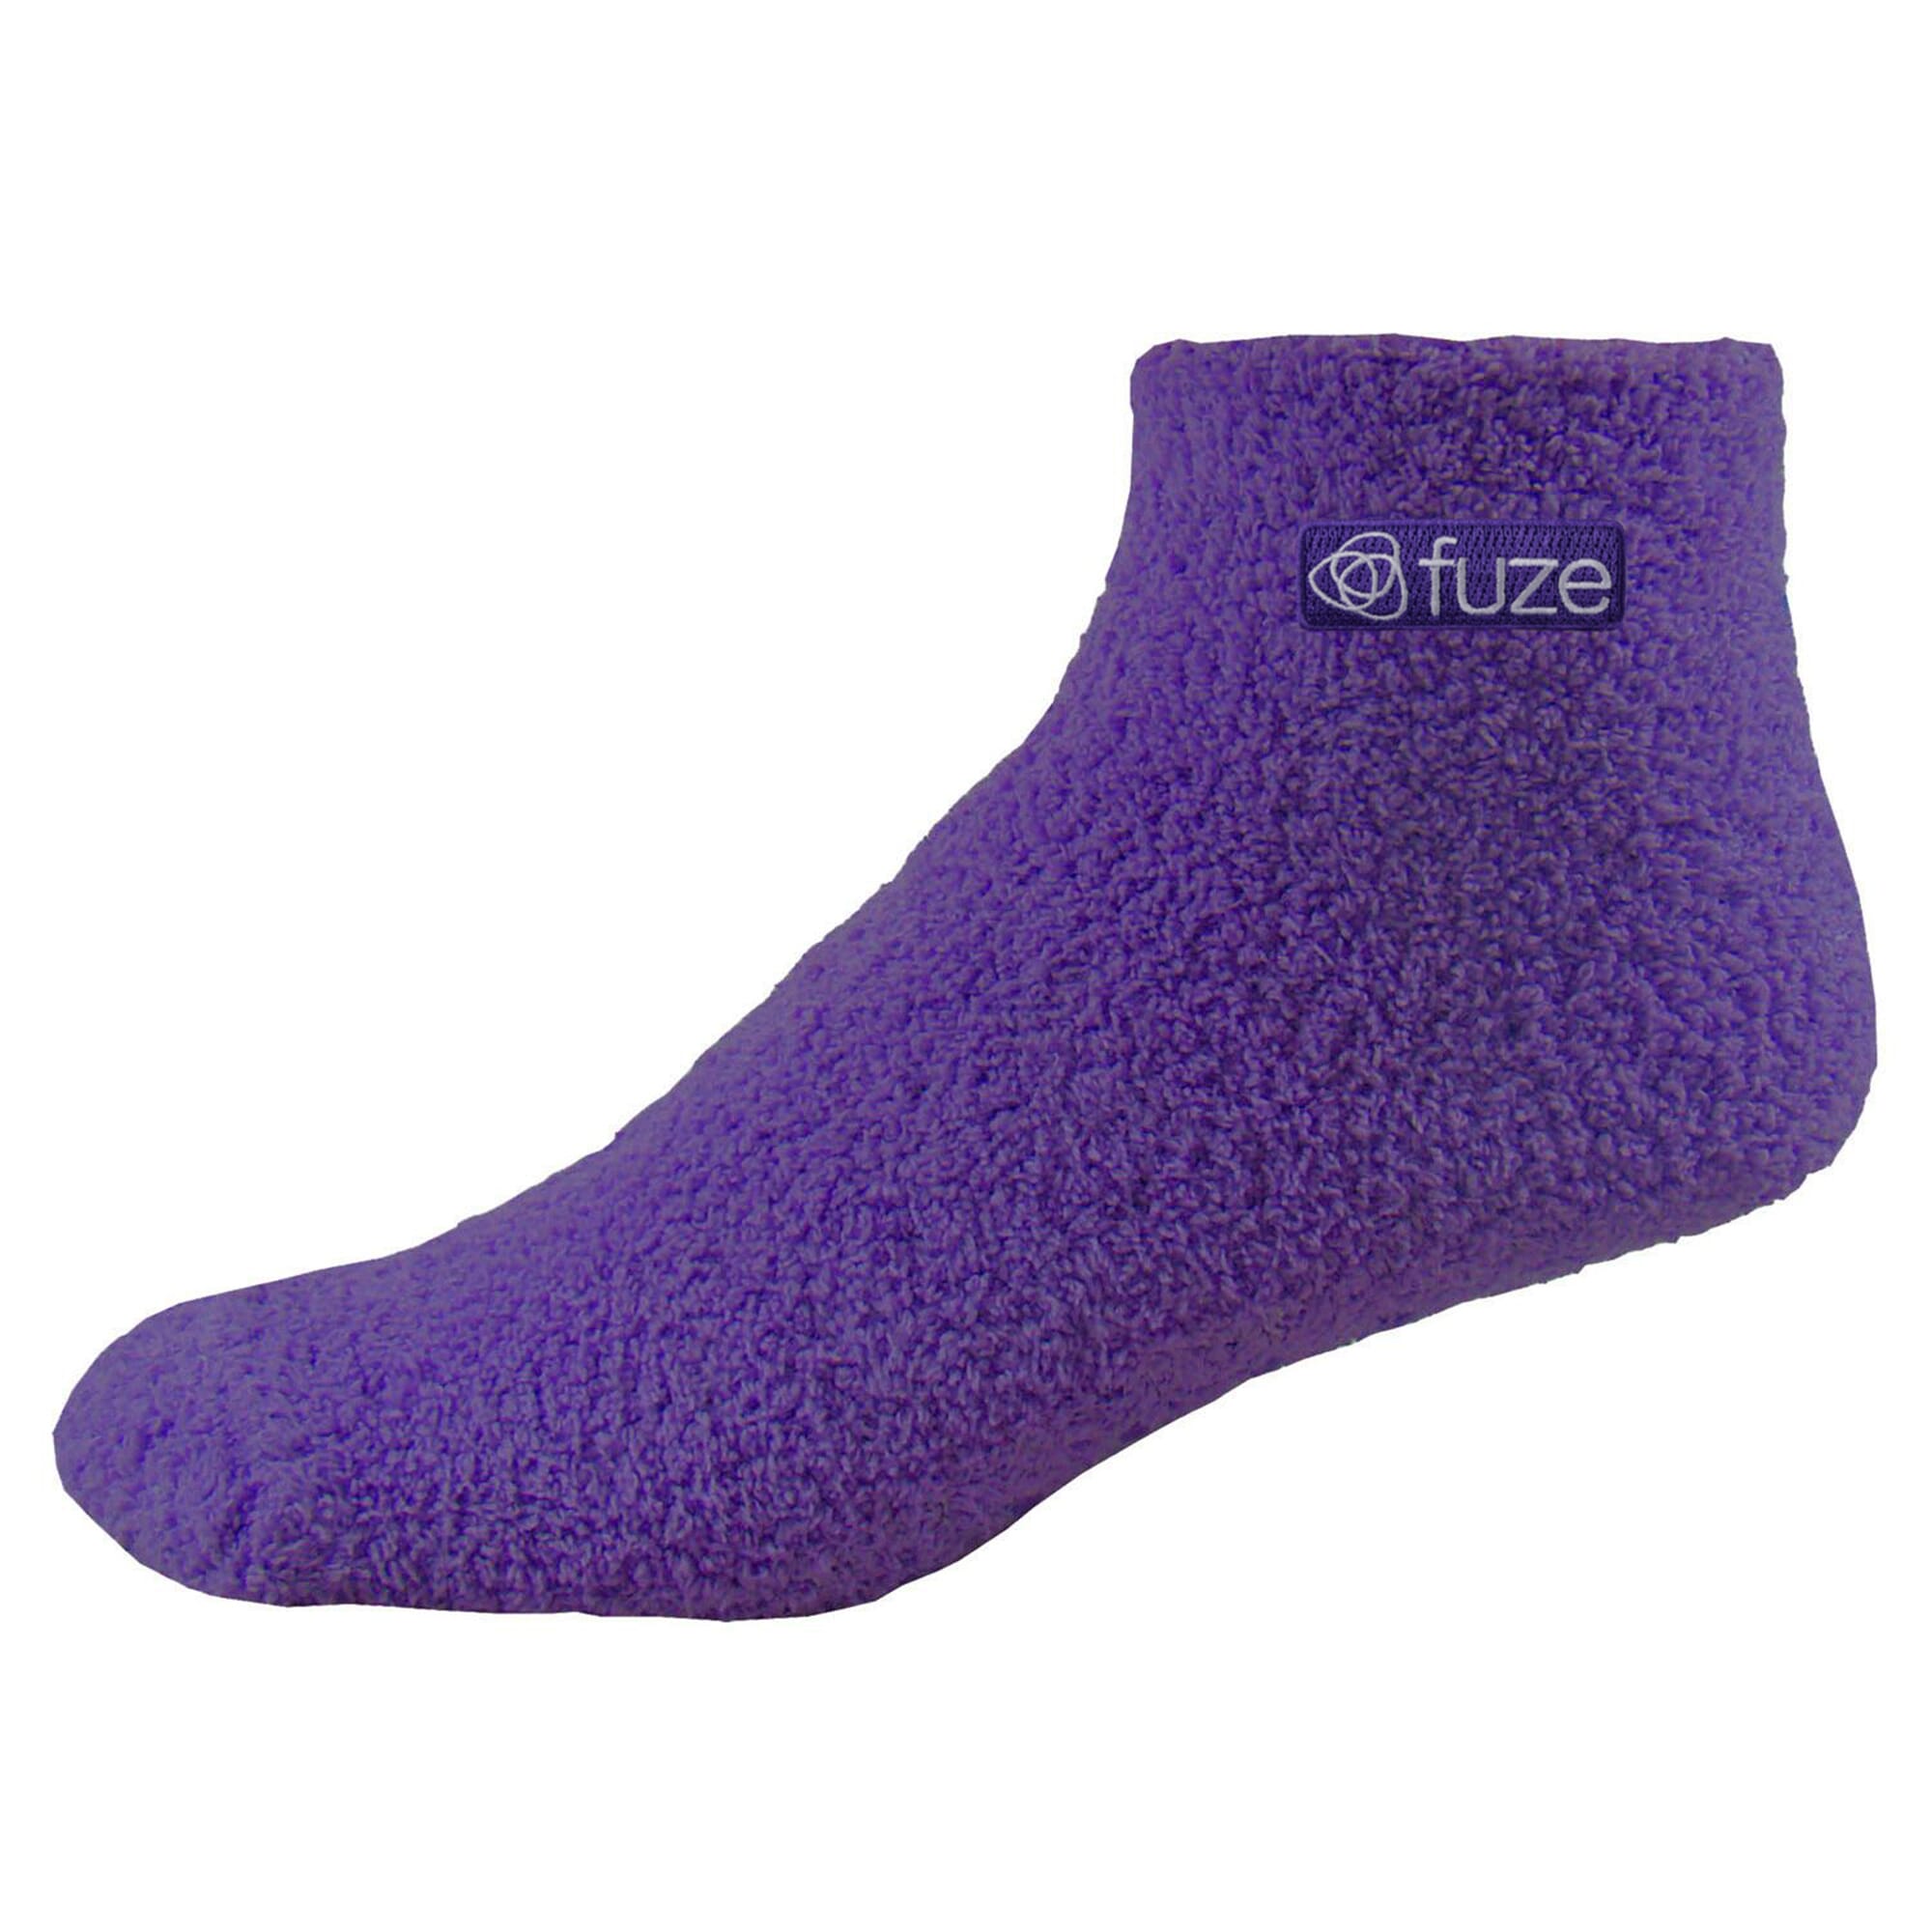 slipper sock with grip dots on sole